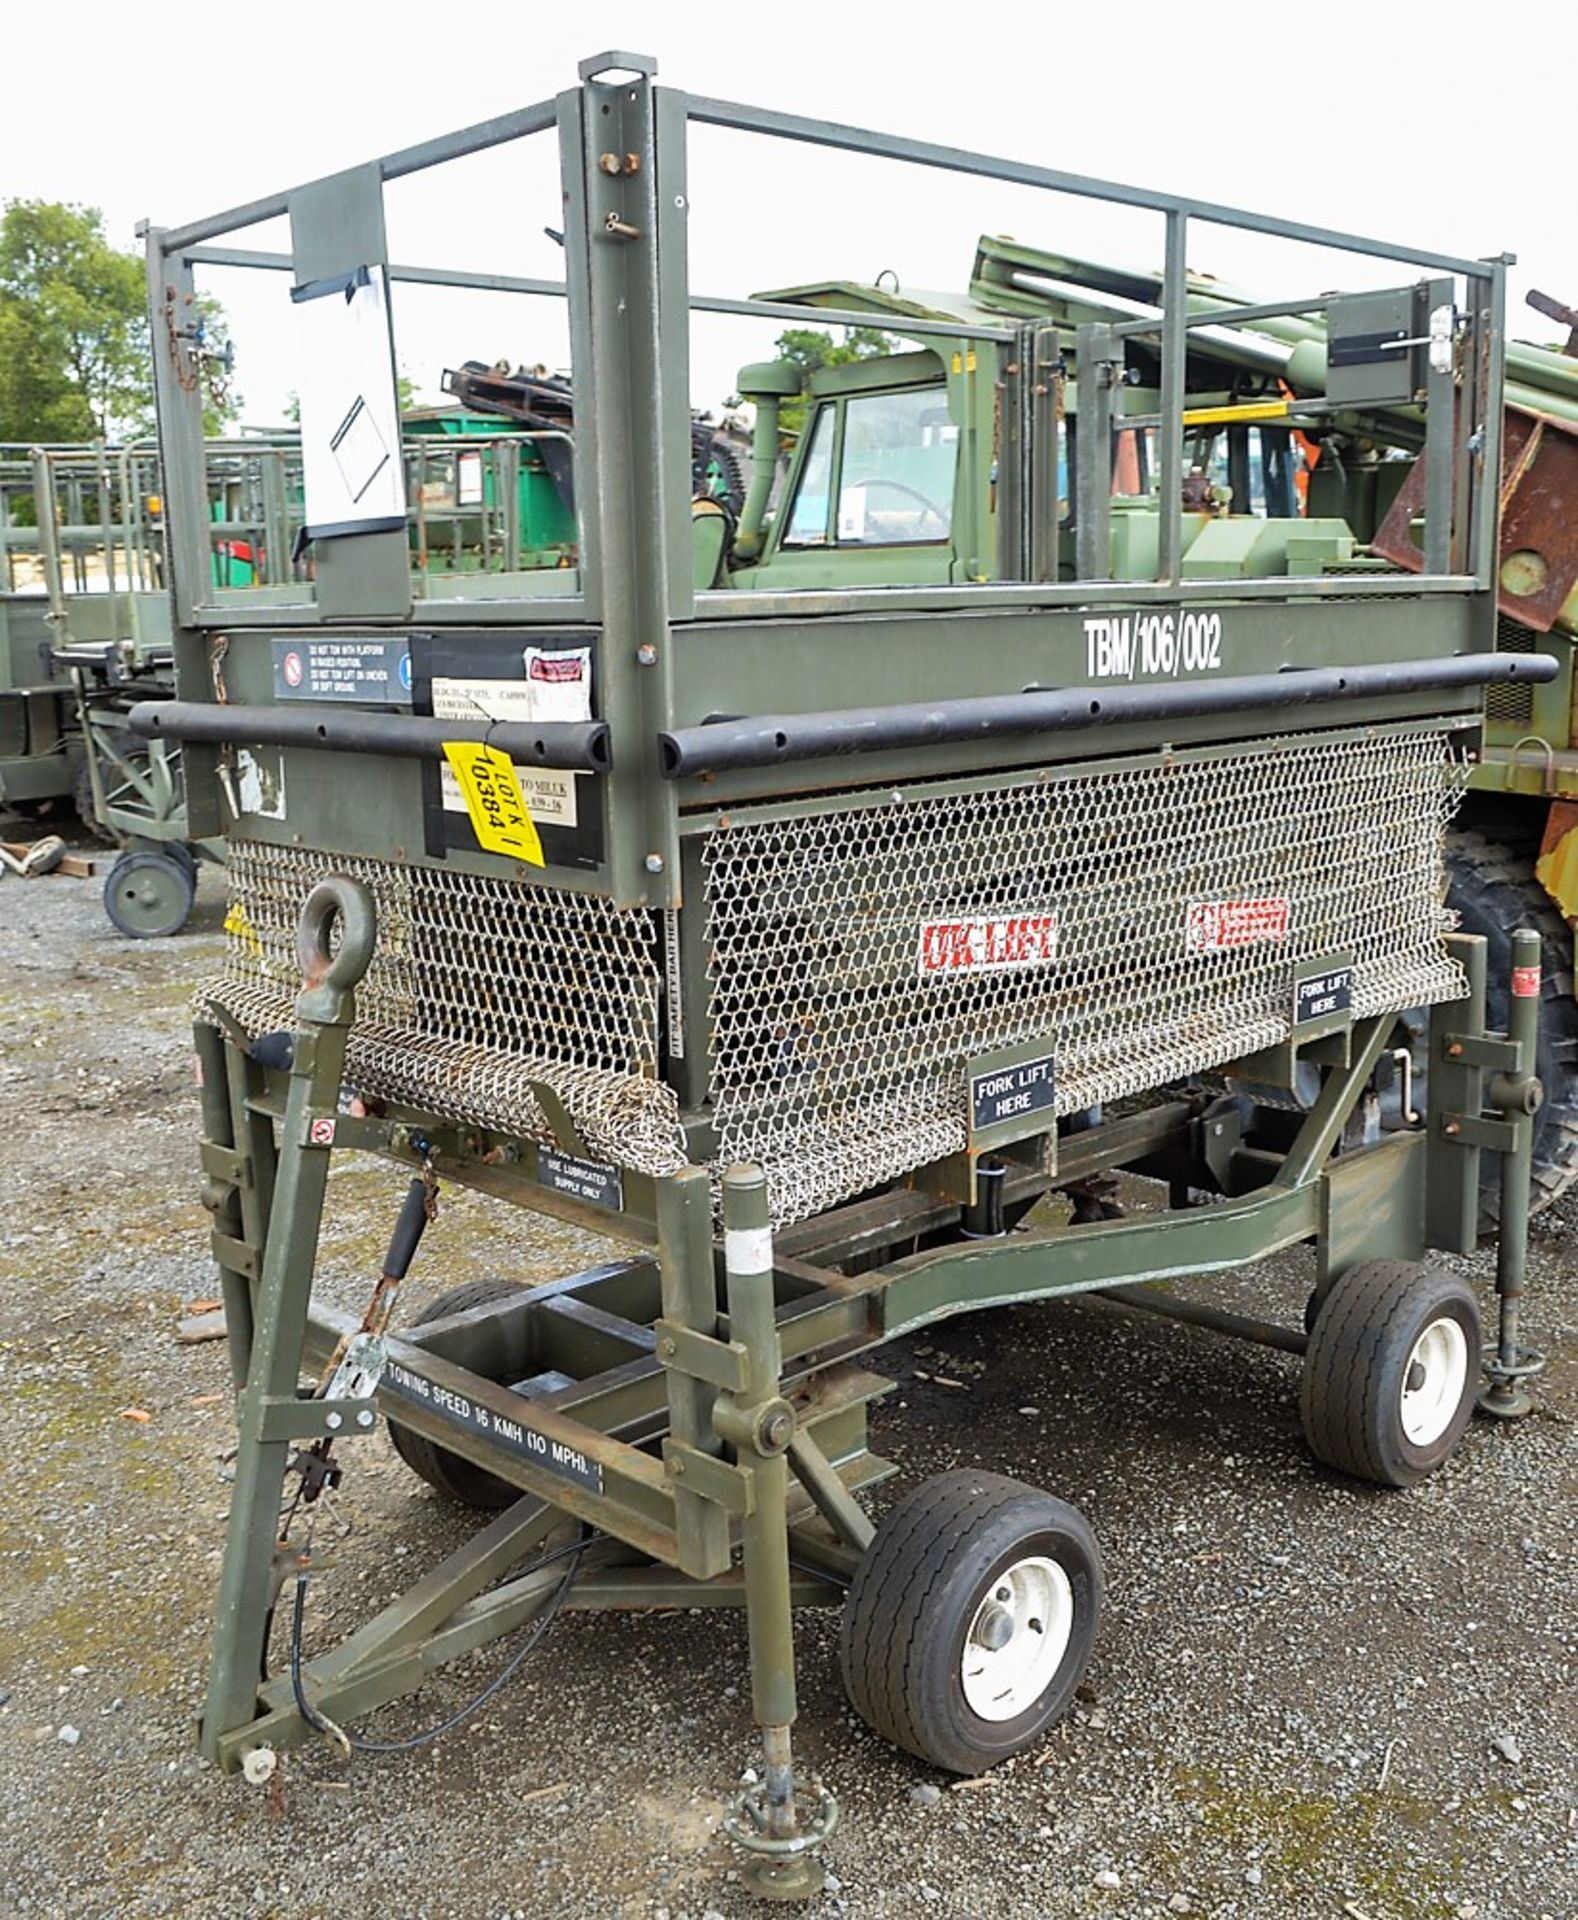 UK Lift manual hydraulic site tow mobile access platform (Ex MOD) - Image 3 of 5